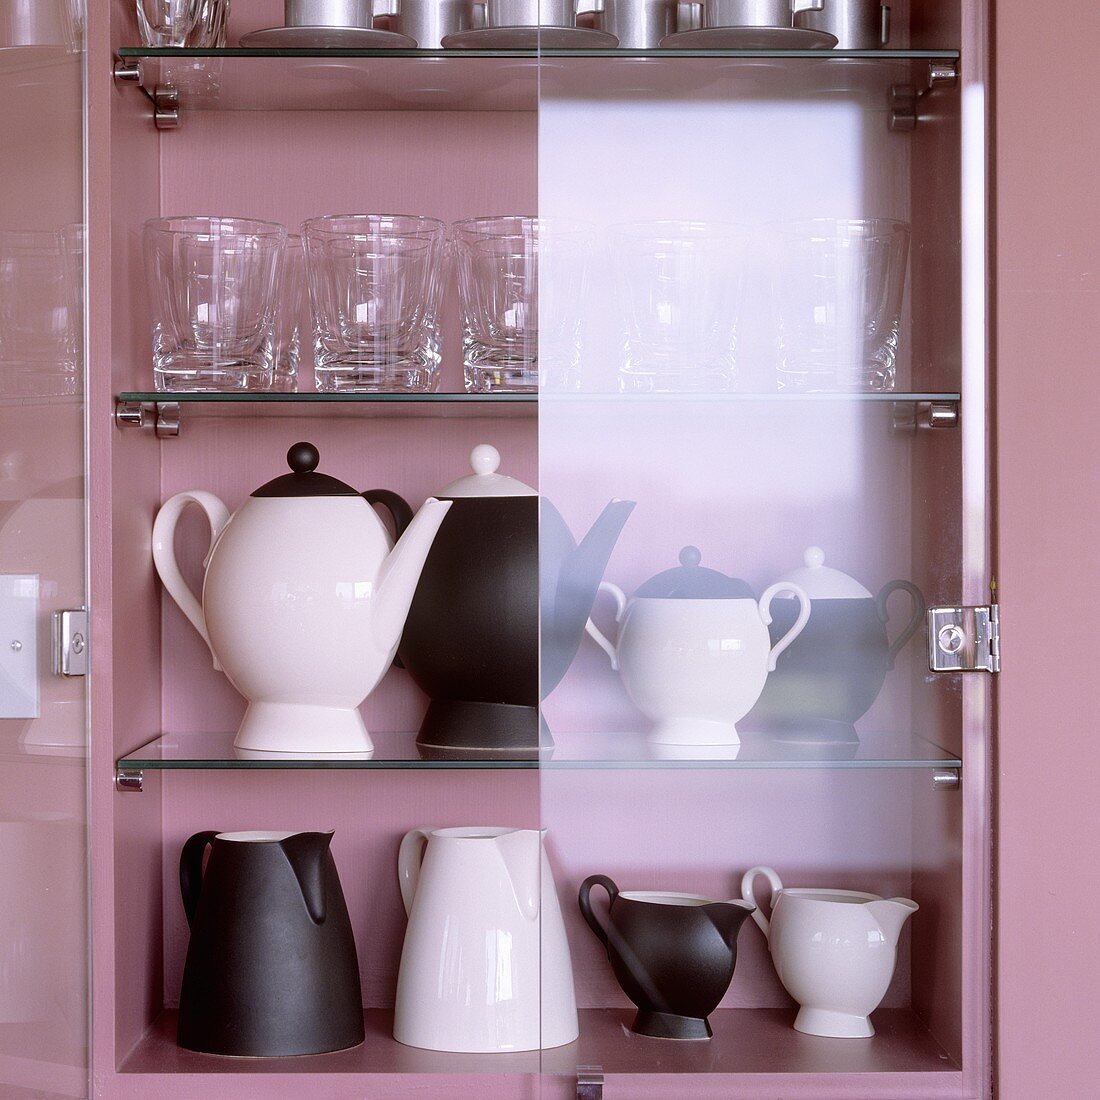 Black and white jugs, pots and glasses in a pink-painted cupboard with open glass doors